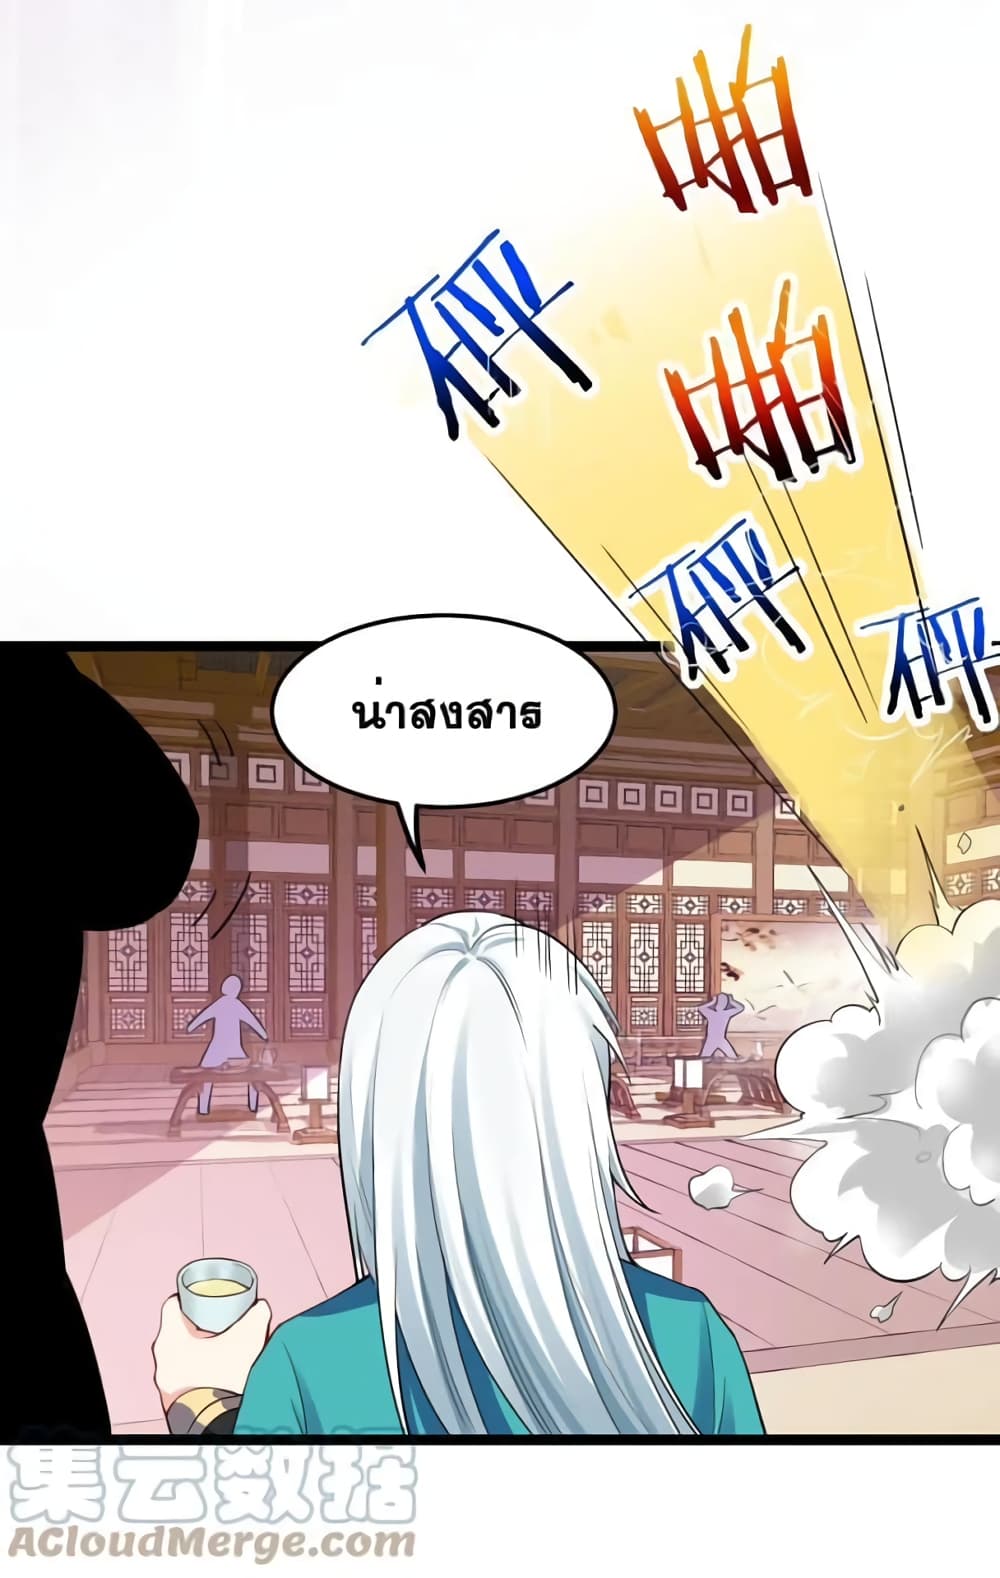 Godsian Masian from Another World ตอนที่ 105 (13)